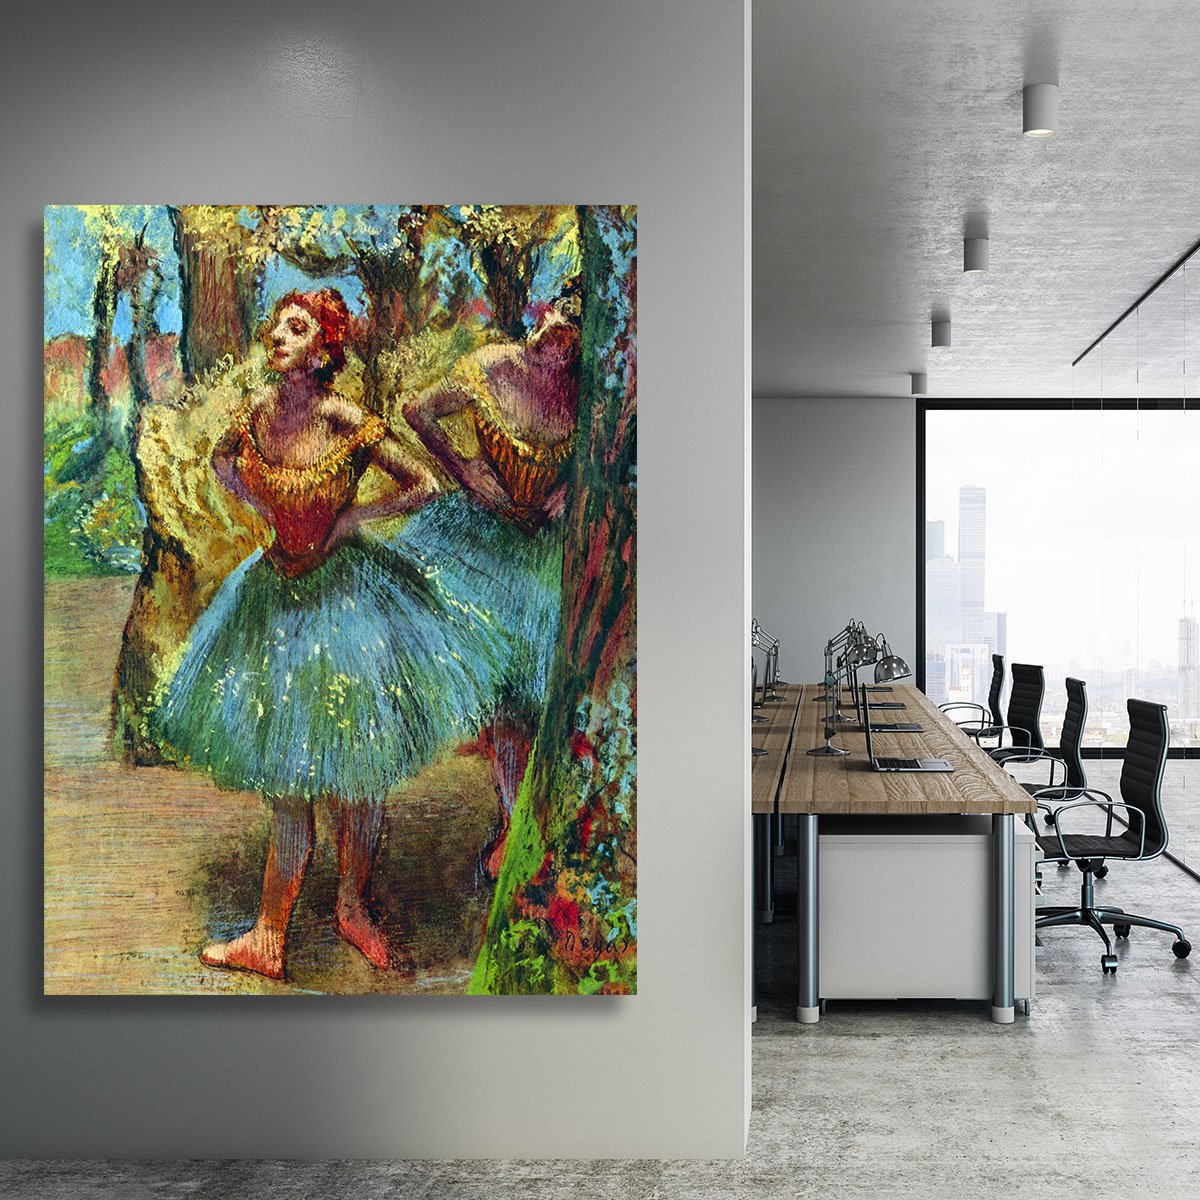 Dancers 2 by Degas Canvas Print or Poster